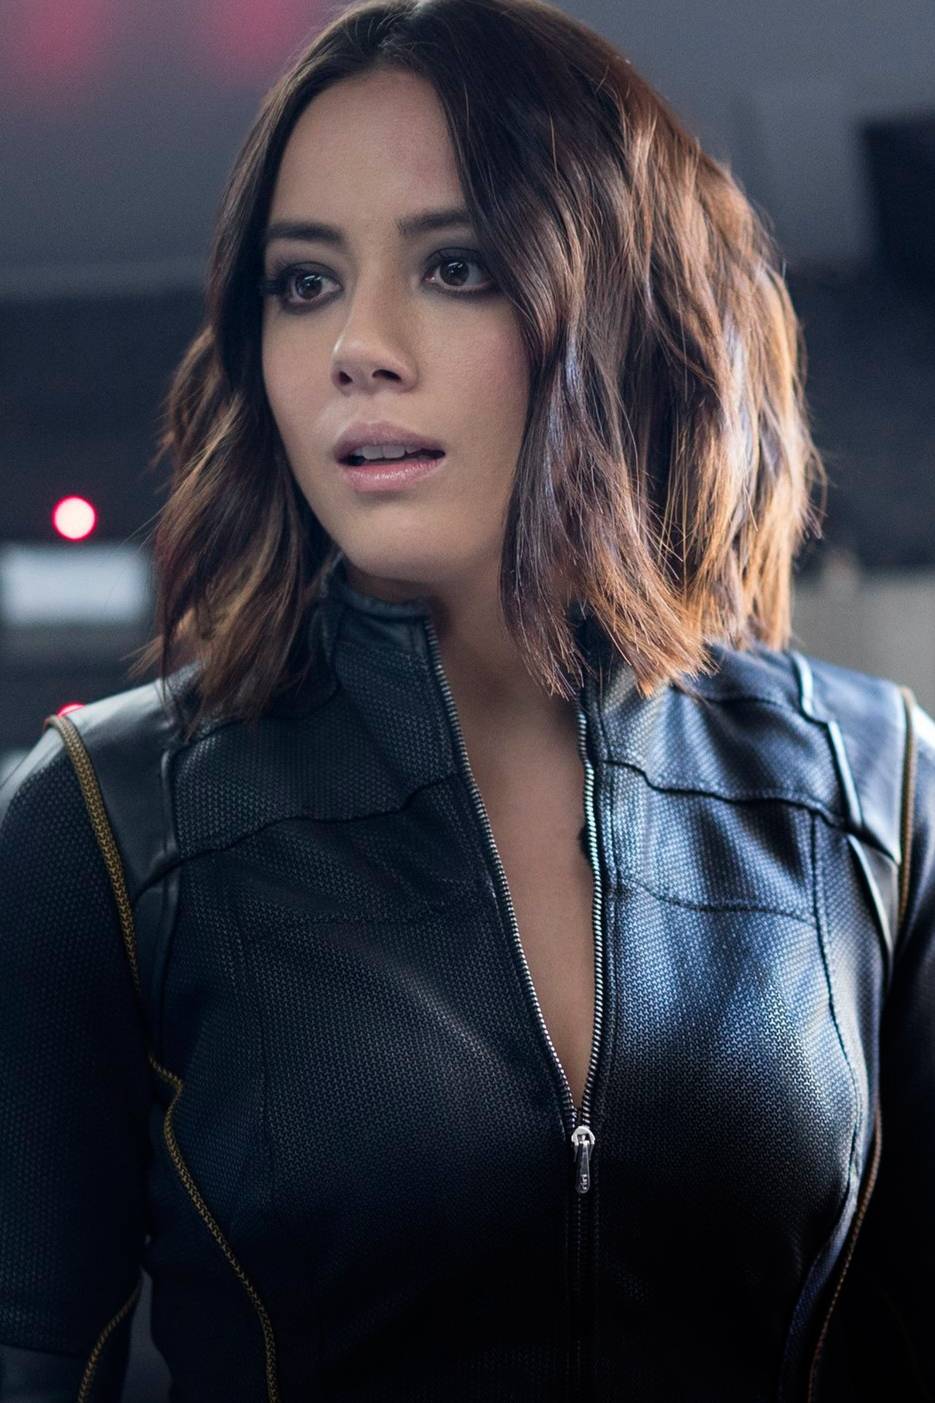 Even Her Look Makes Me Cum So Sexy Getting From This Suit Black Widow Vibes Scrolller 4172